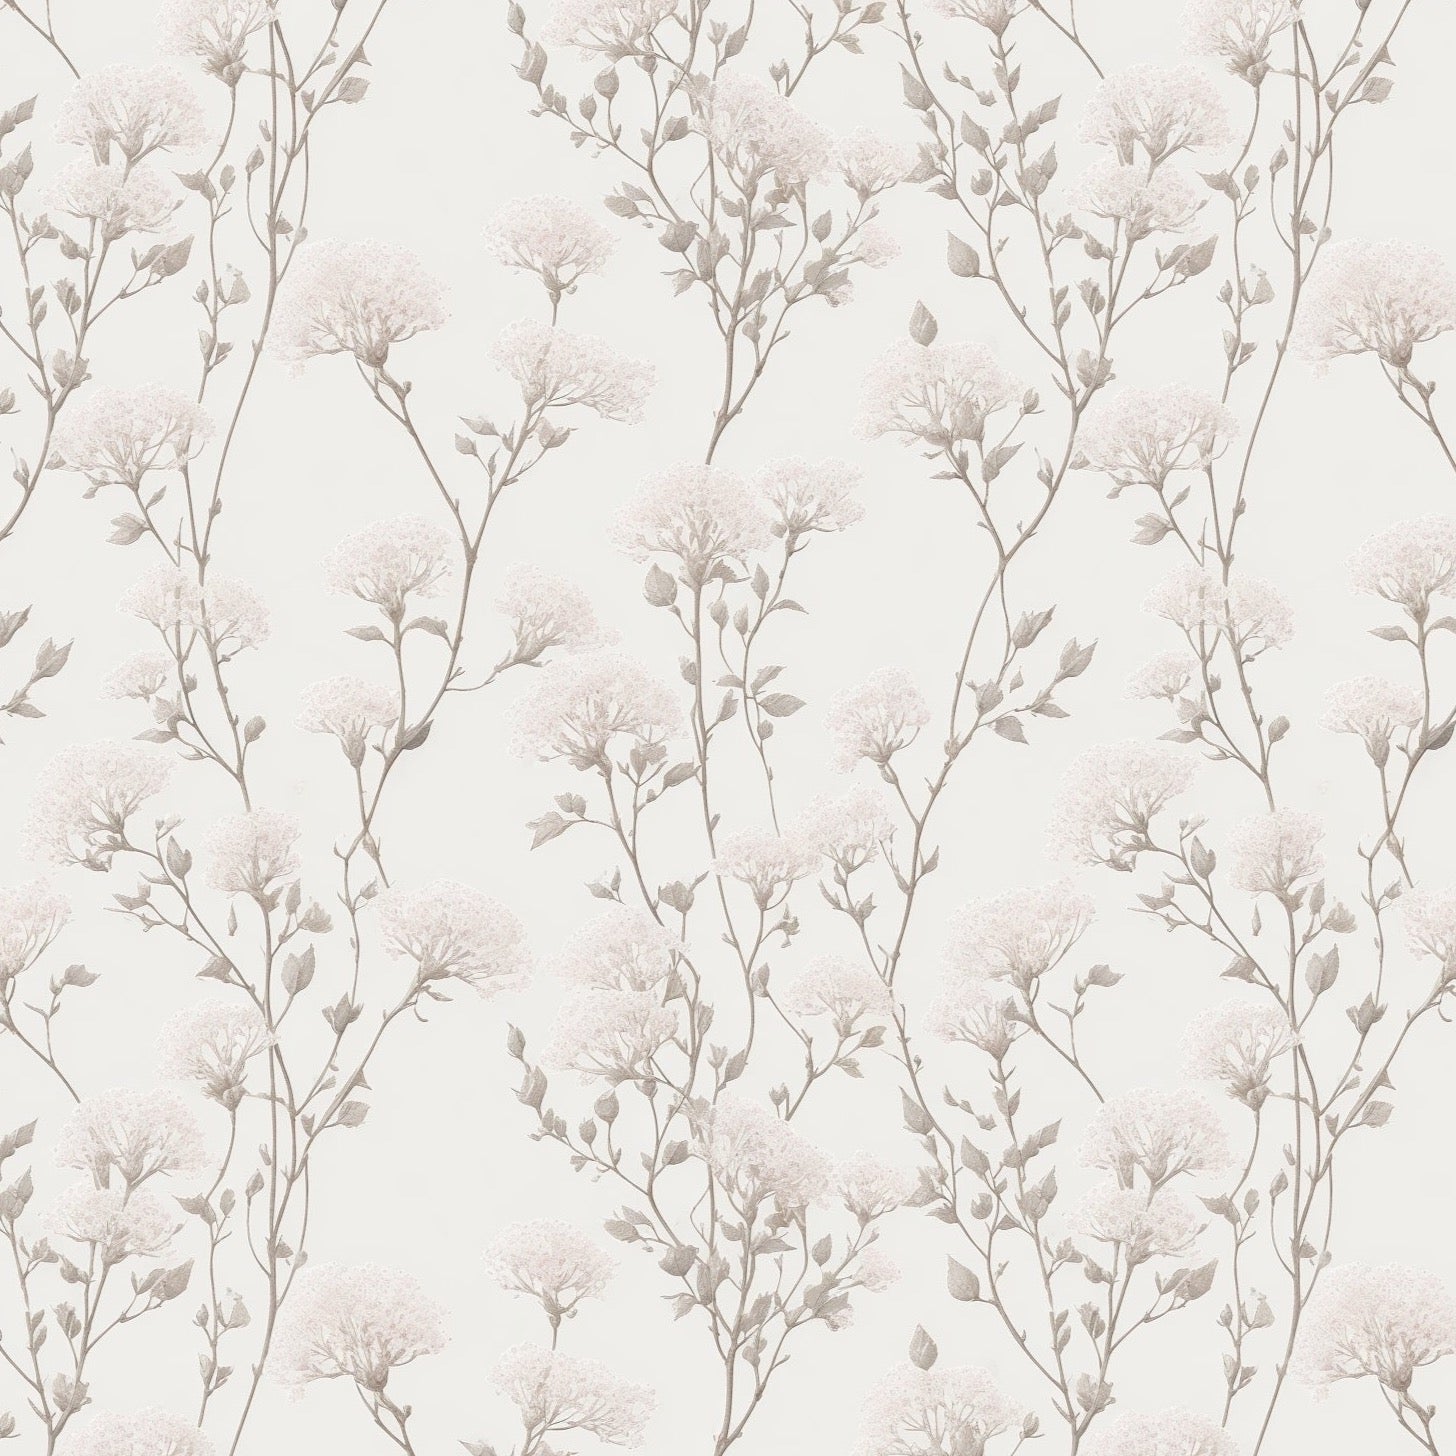 A close-up view of the Vintage Floral Reverie Wallpaper, highlighting the detailed watercolor-style flowers and branches in soft pinks and grays set against an off-white background for a classic, romantic aesthetic